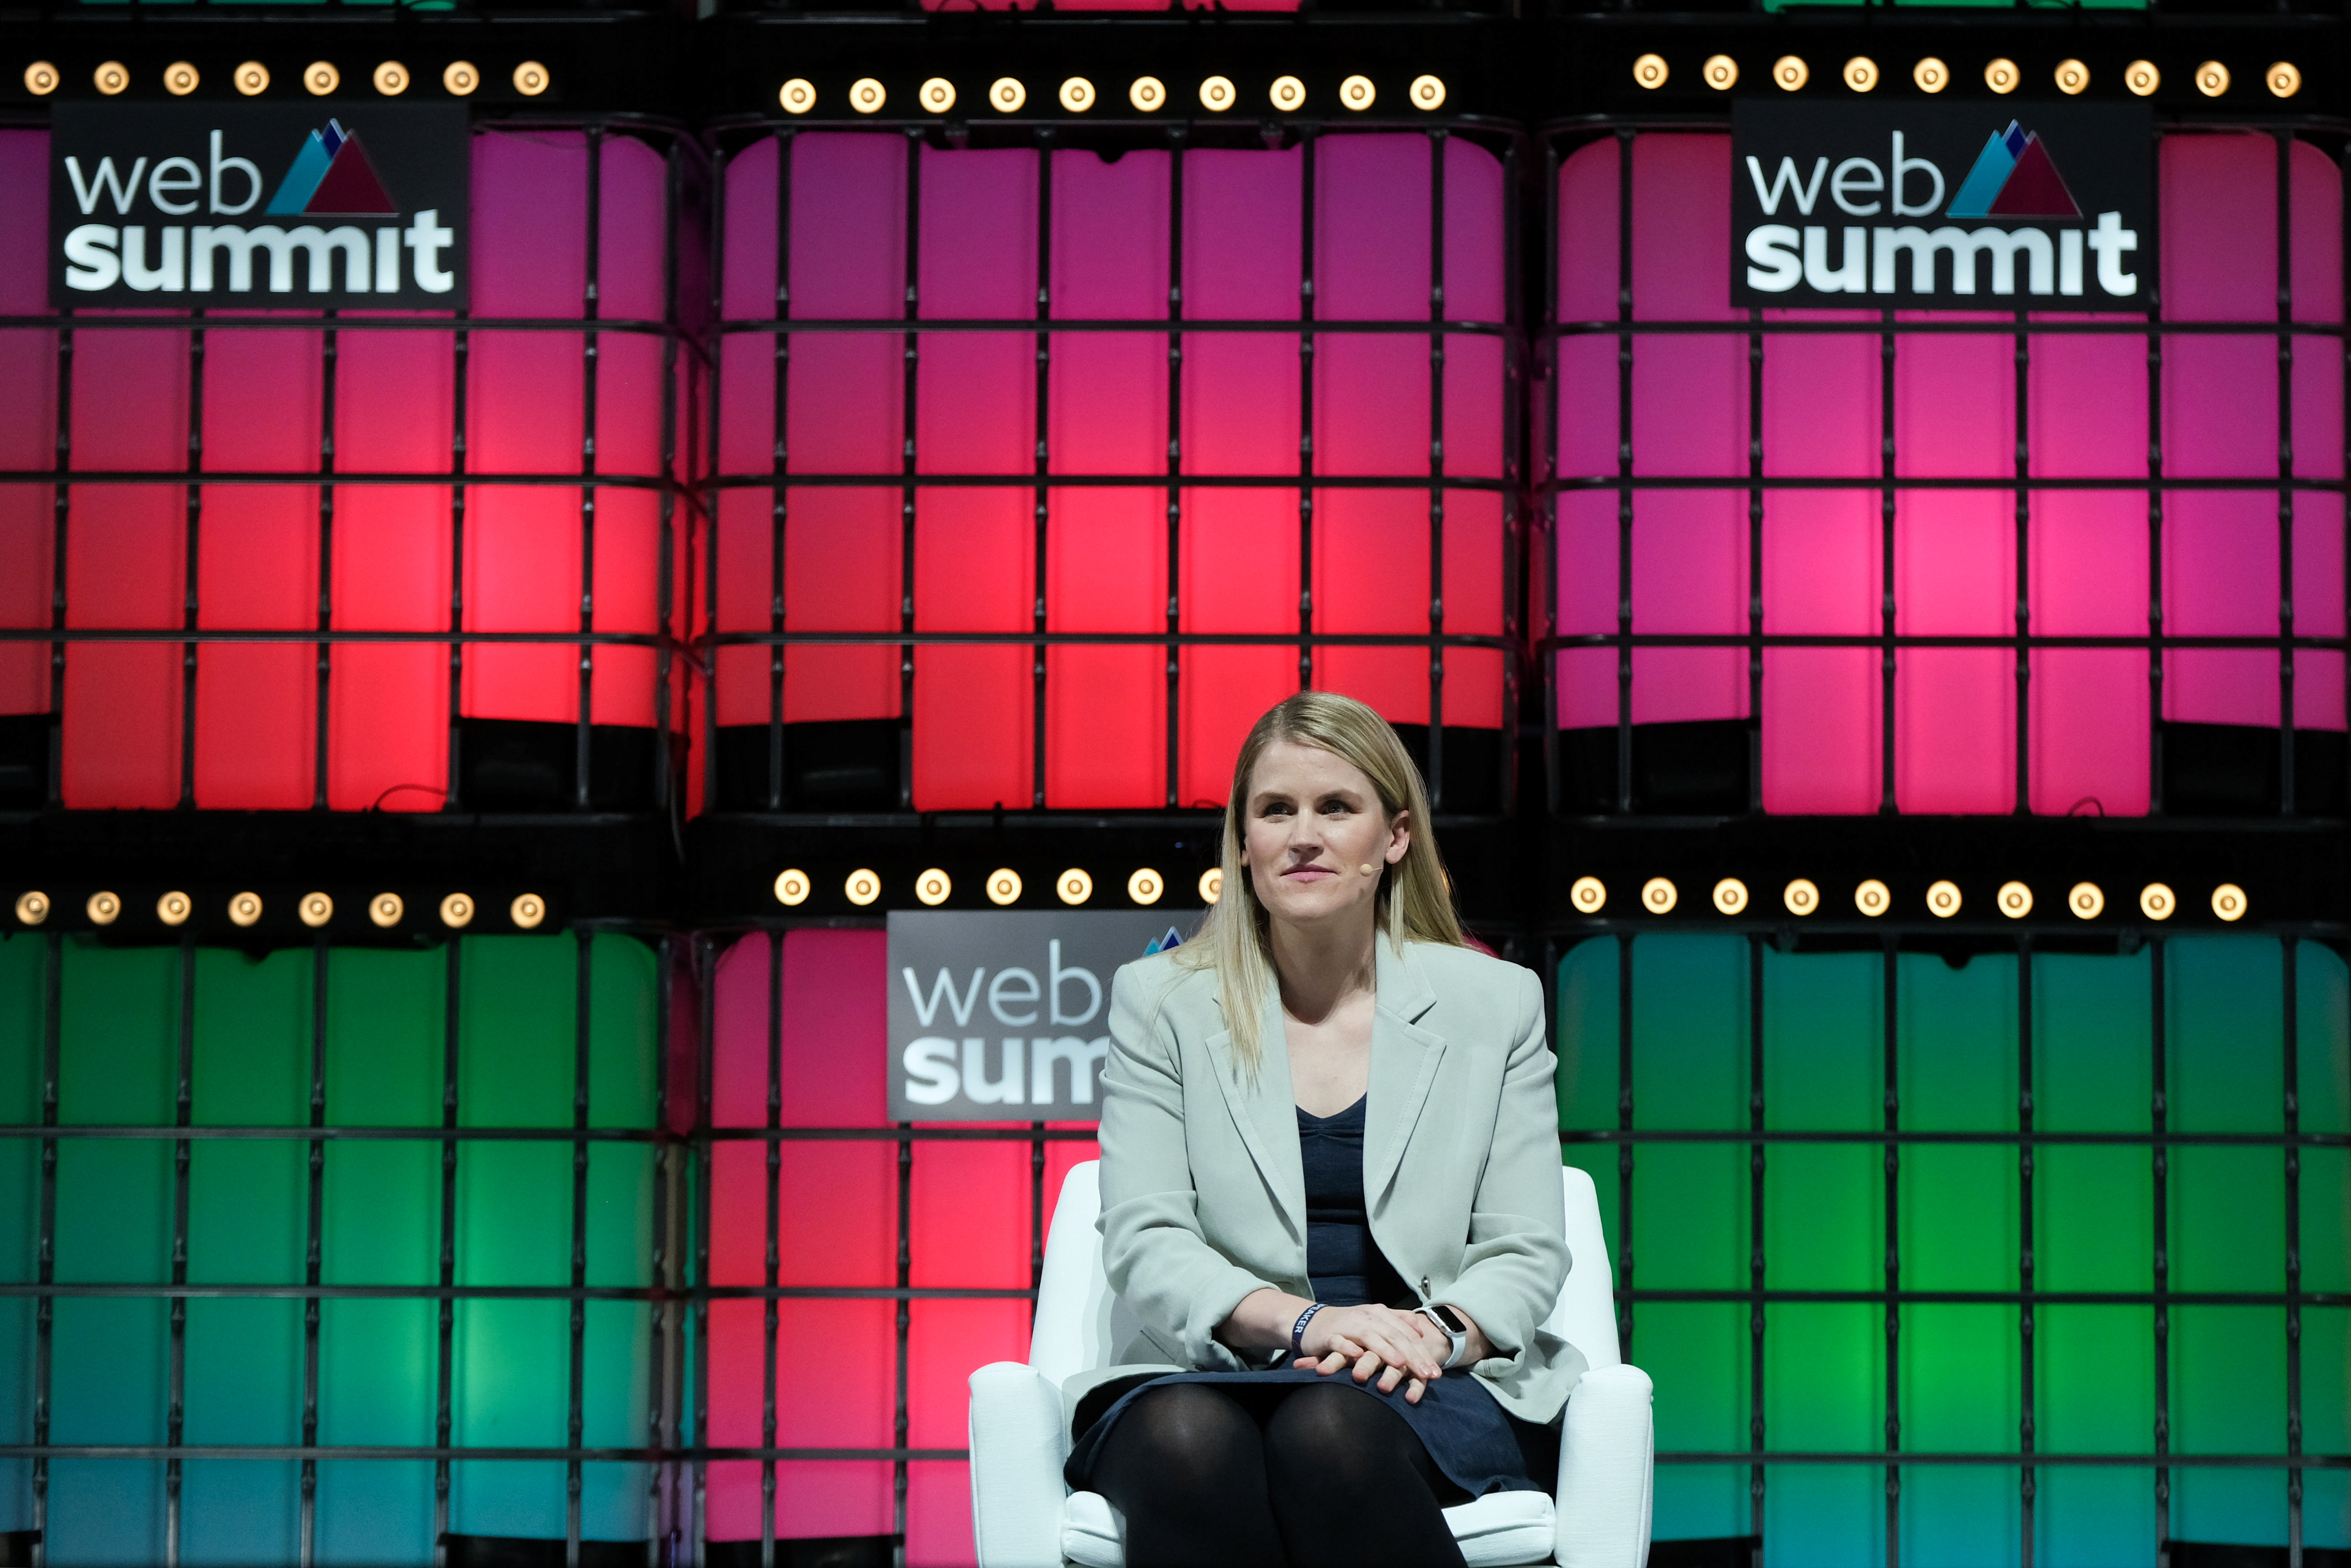 The Facebook Whistleblower Frances Haugen looks on during the opening ceremony of Web Summit, Europe's largest technology conference, in Lisbon